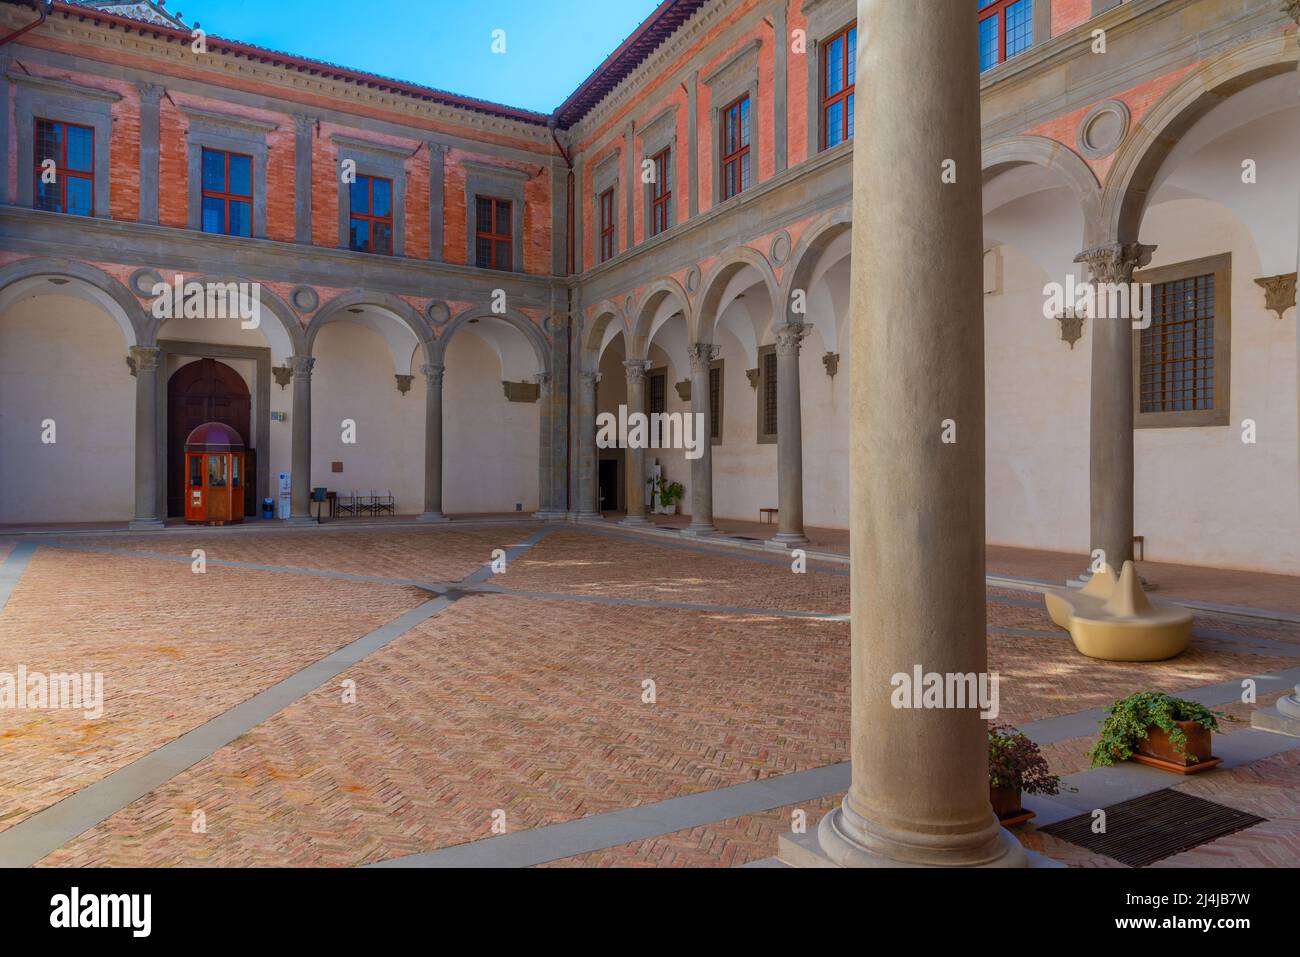 Courtyard of Palazzo Ducale in Gubbio, Italy. Stock Photo